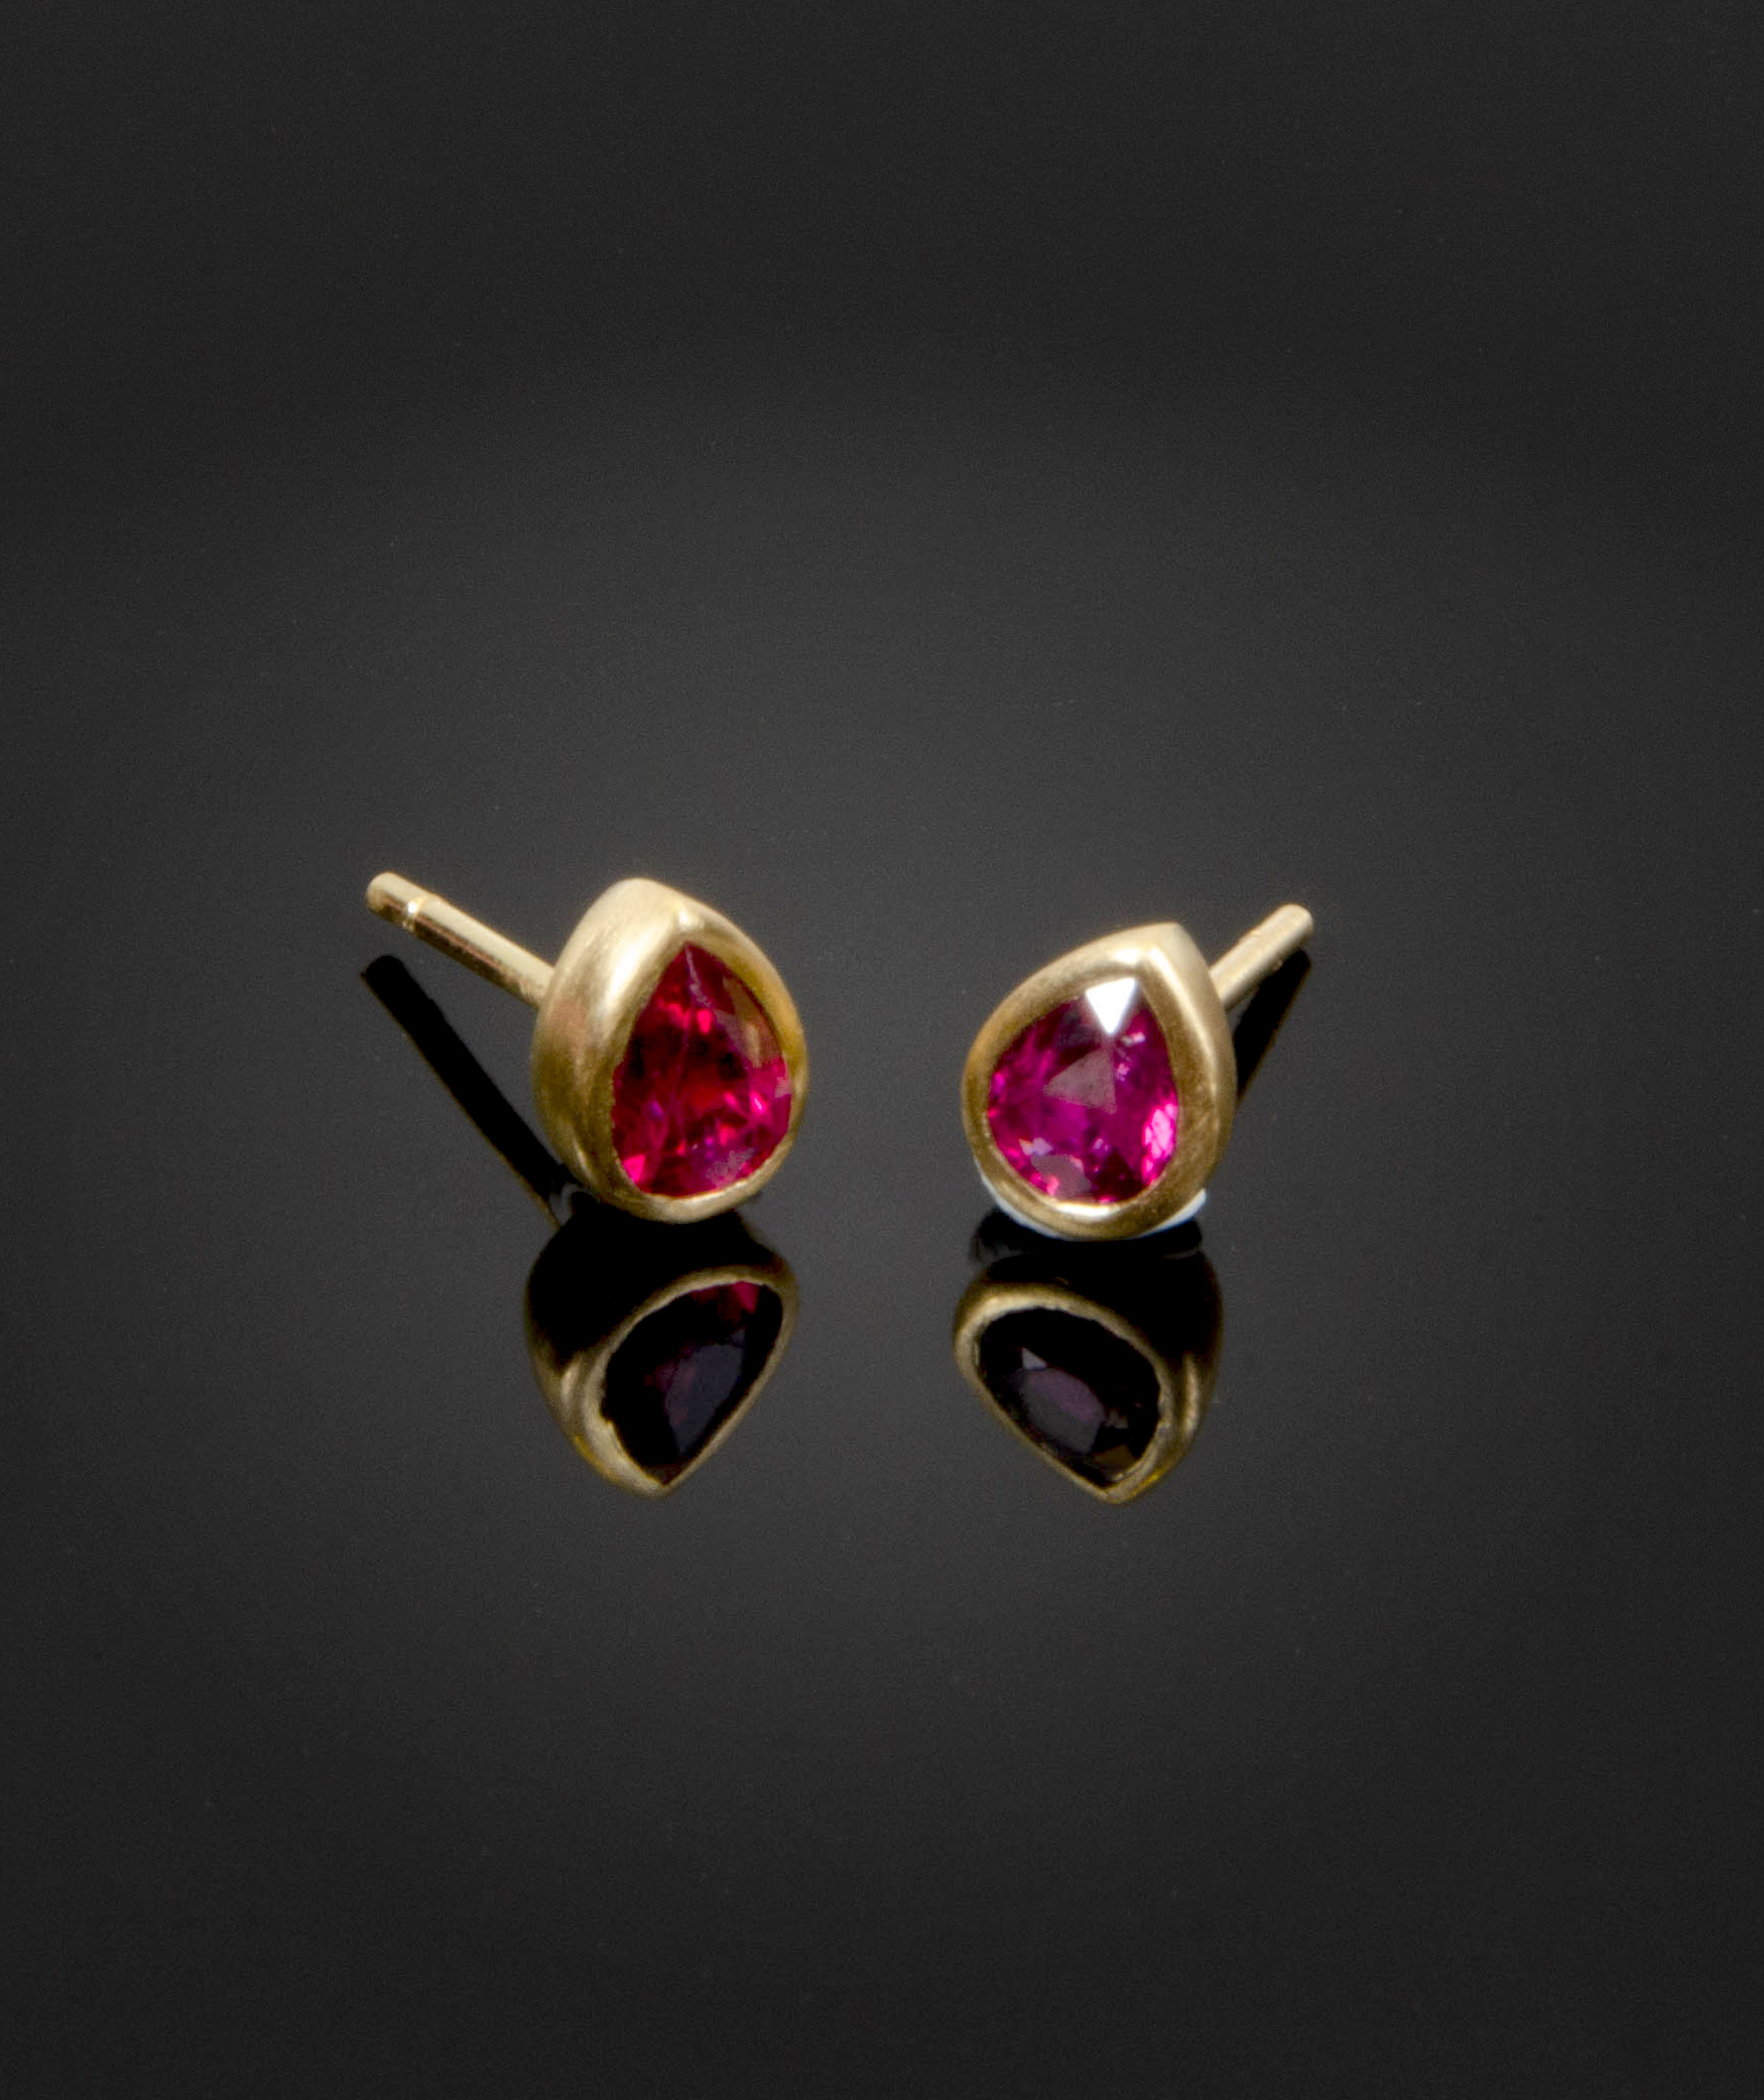 18K brushed yellow gold stud earrings with pear shaped 1.29 tcw Rubies